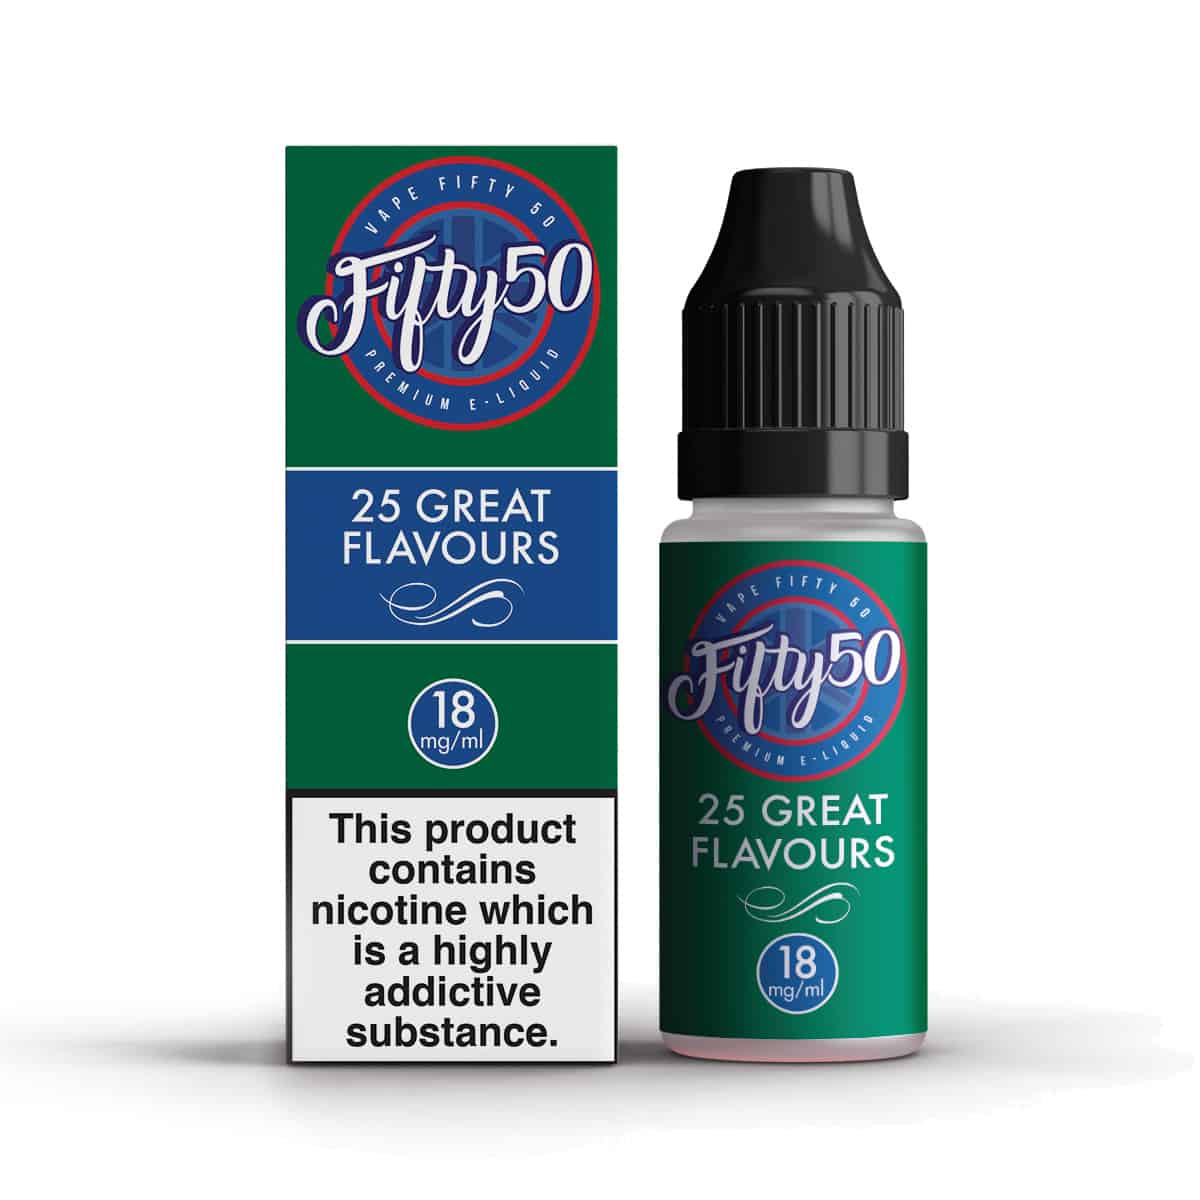 United kingdom UK First Eliquid Subscription Service Vape Made Simple offering Disposables, Freebase, Nic salts -  with a wide variety of disposables Lost Mary Crystal Bar Elf Disposables - 50 Fifty Apple Slush 18mg